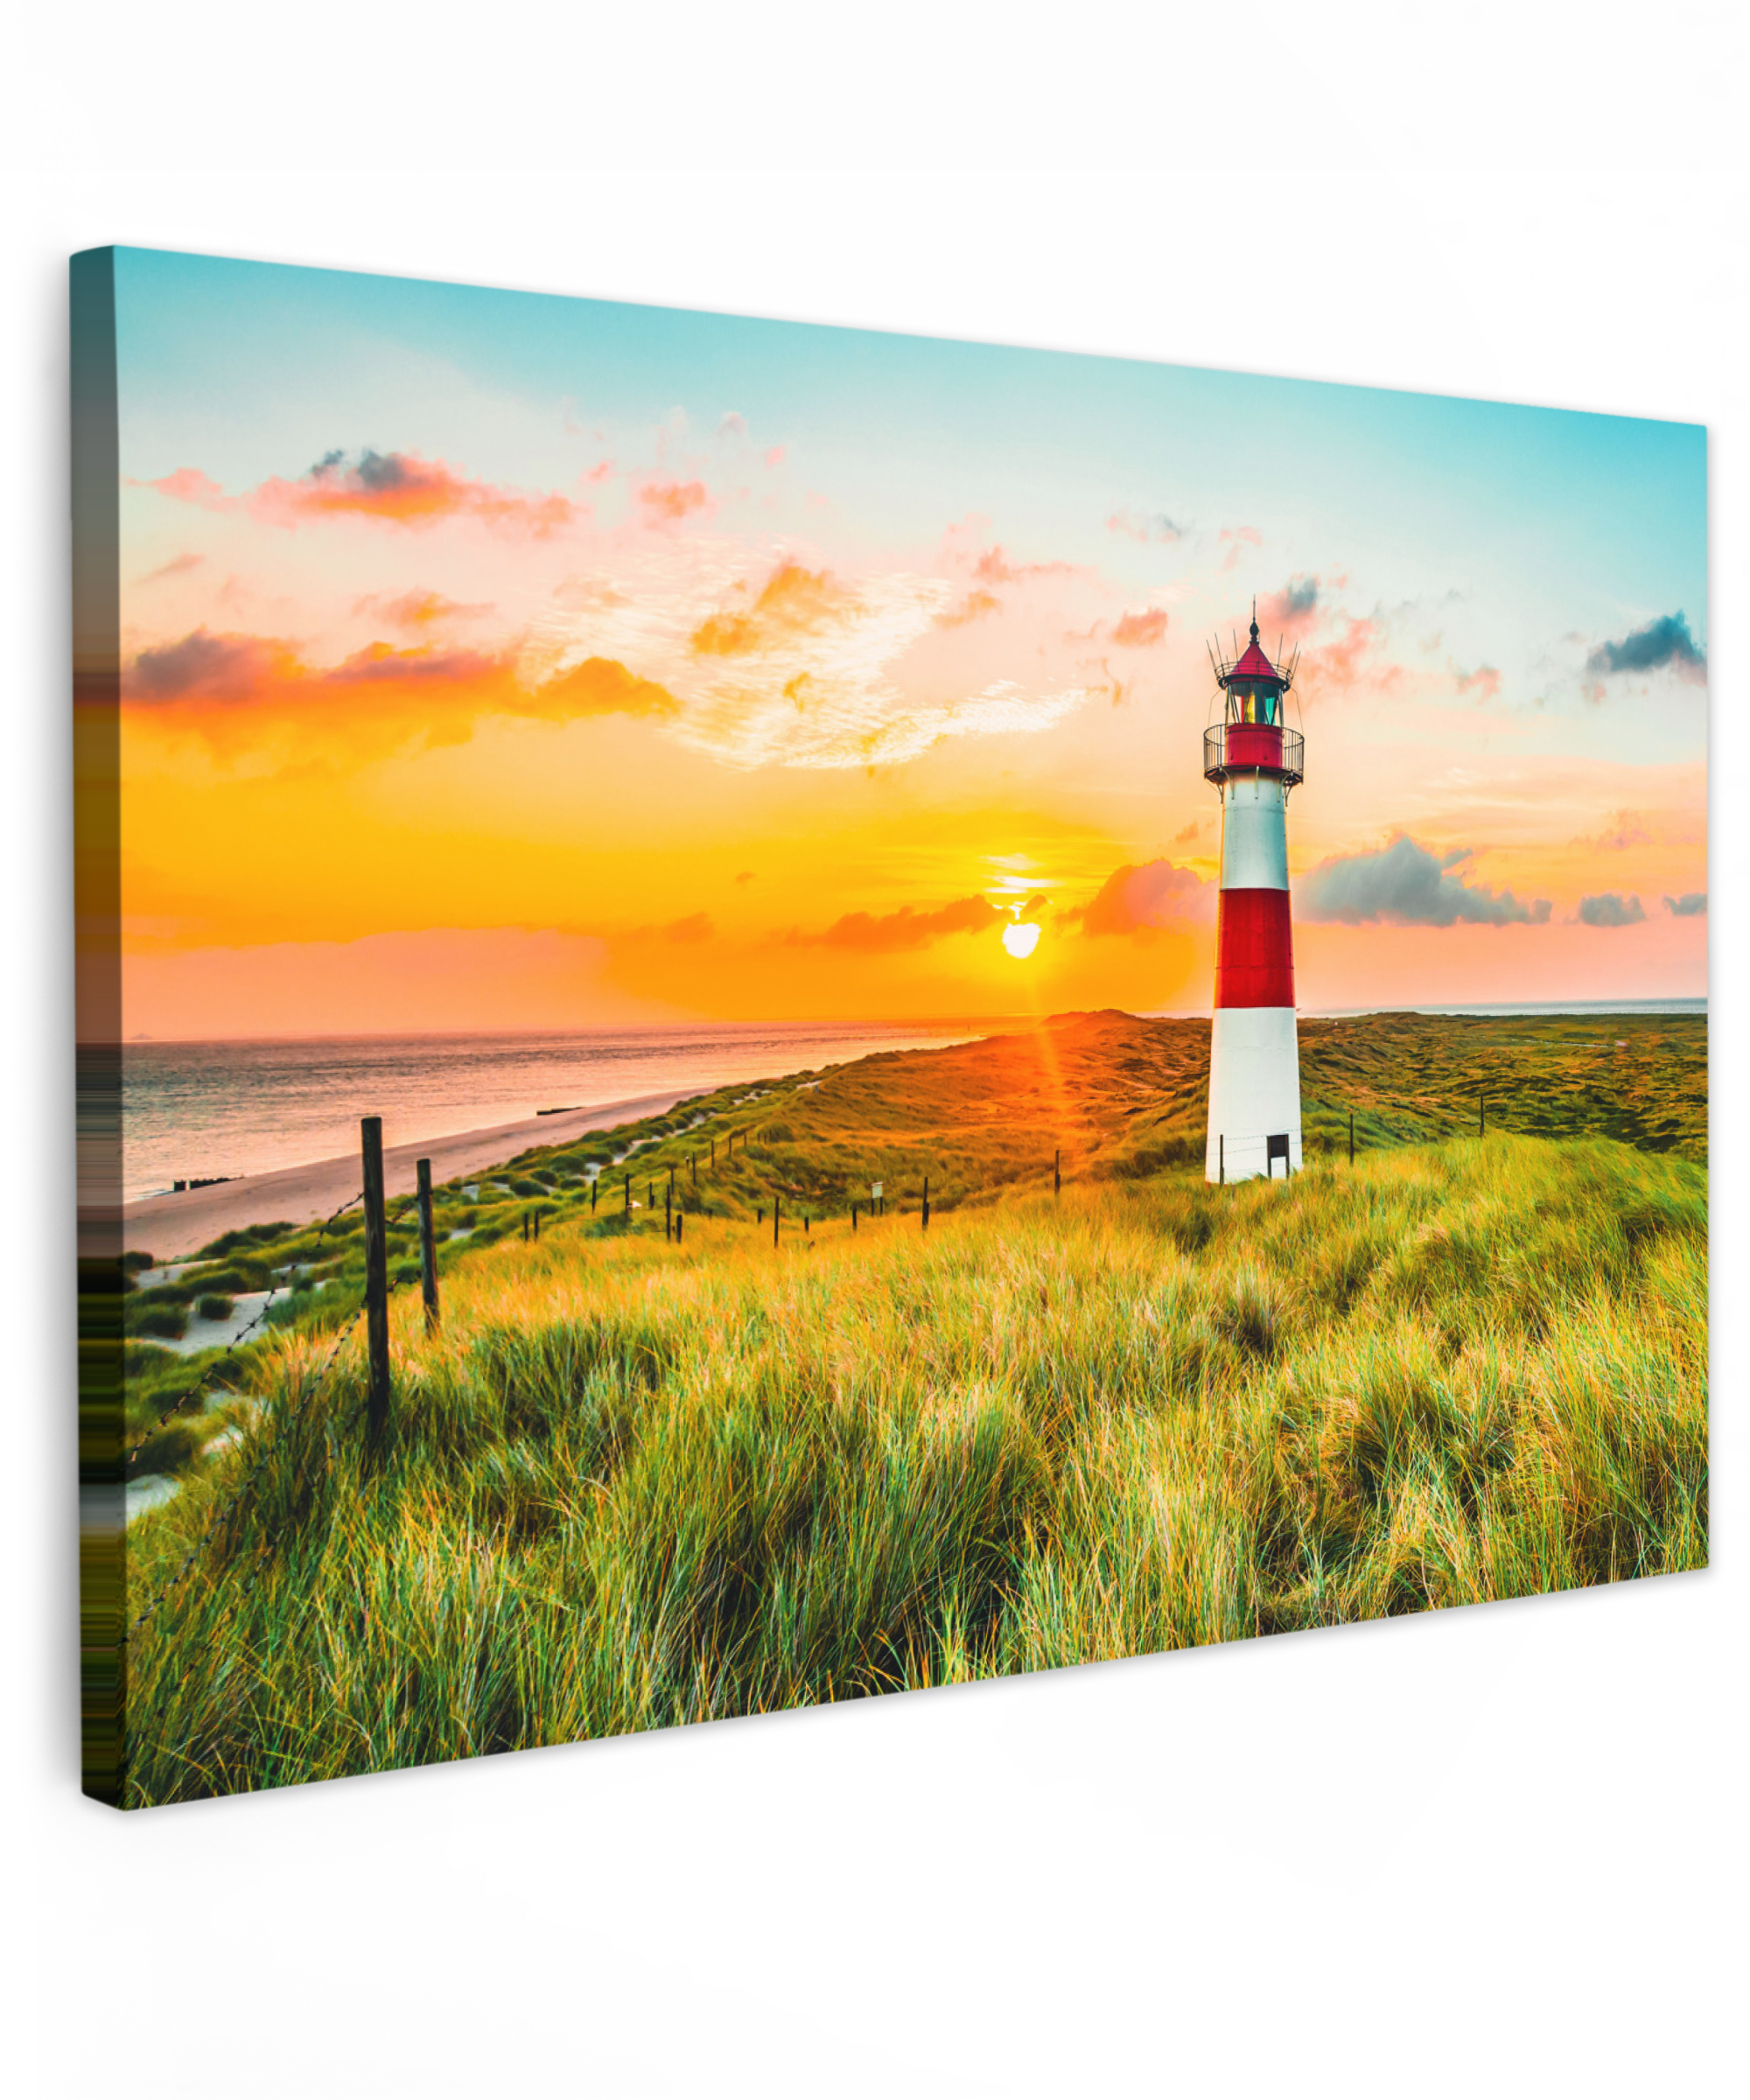 Tableau sur toile - Phare - Nature - Soleil - Paysage - Herbe - Plage - Mer